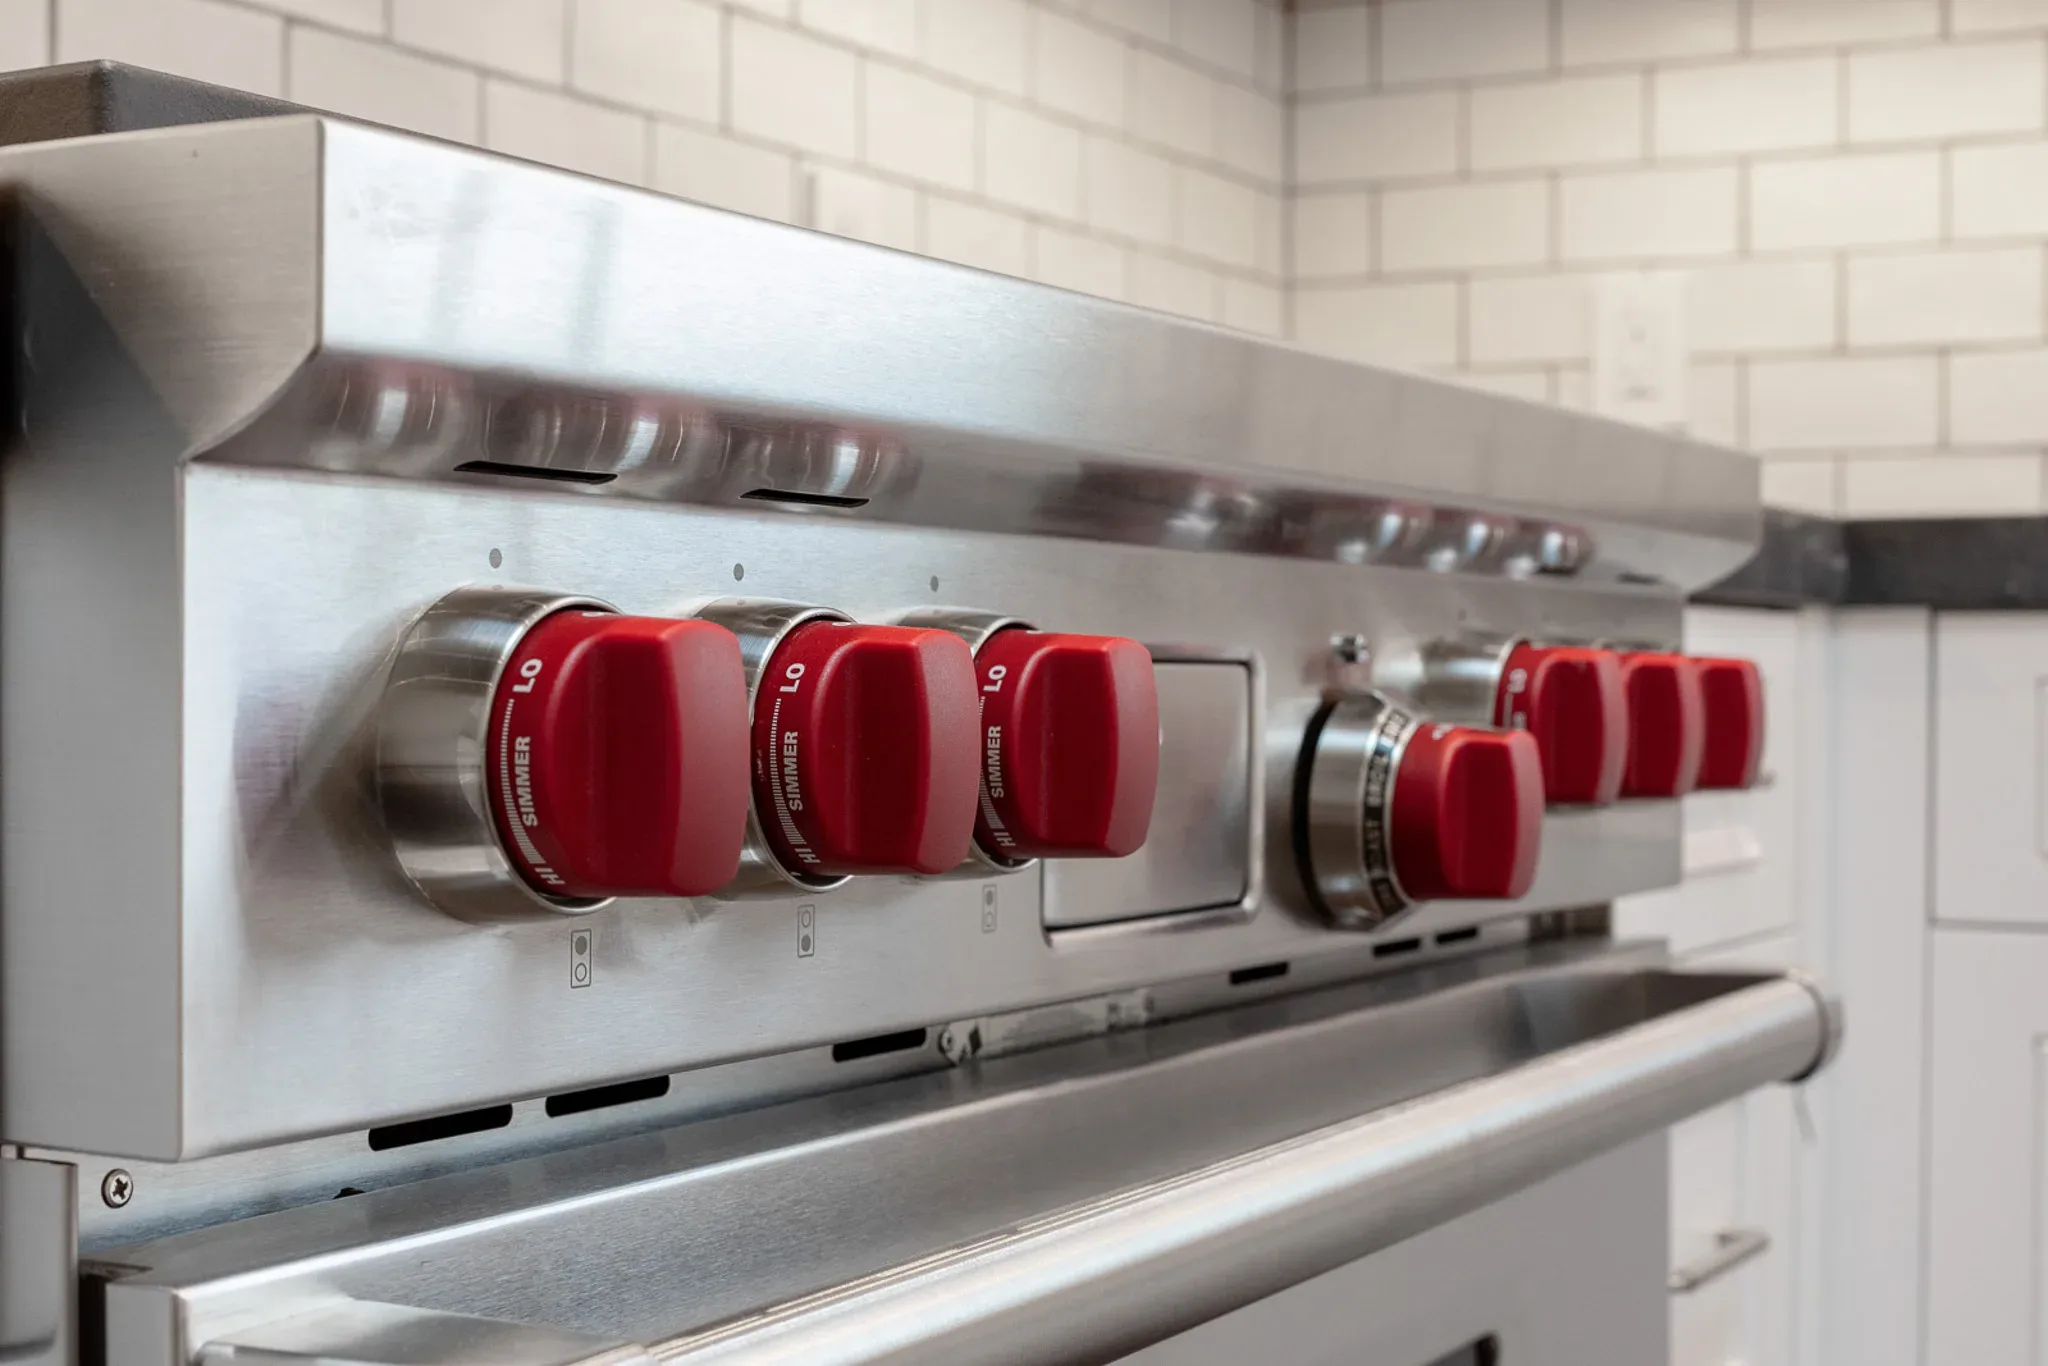 Red knobs on a stainless steel oven.